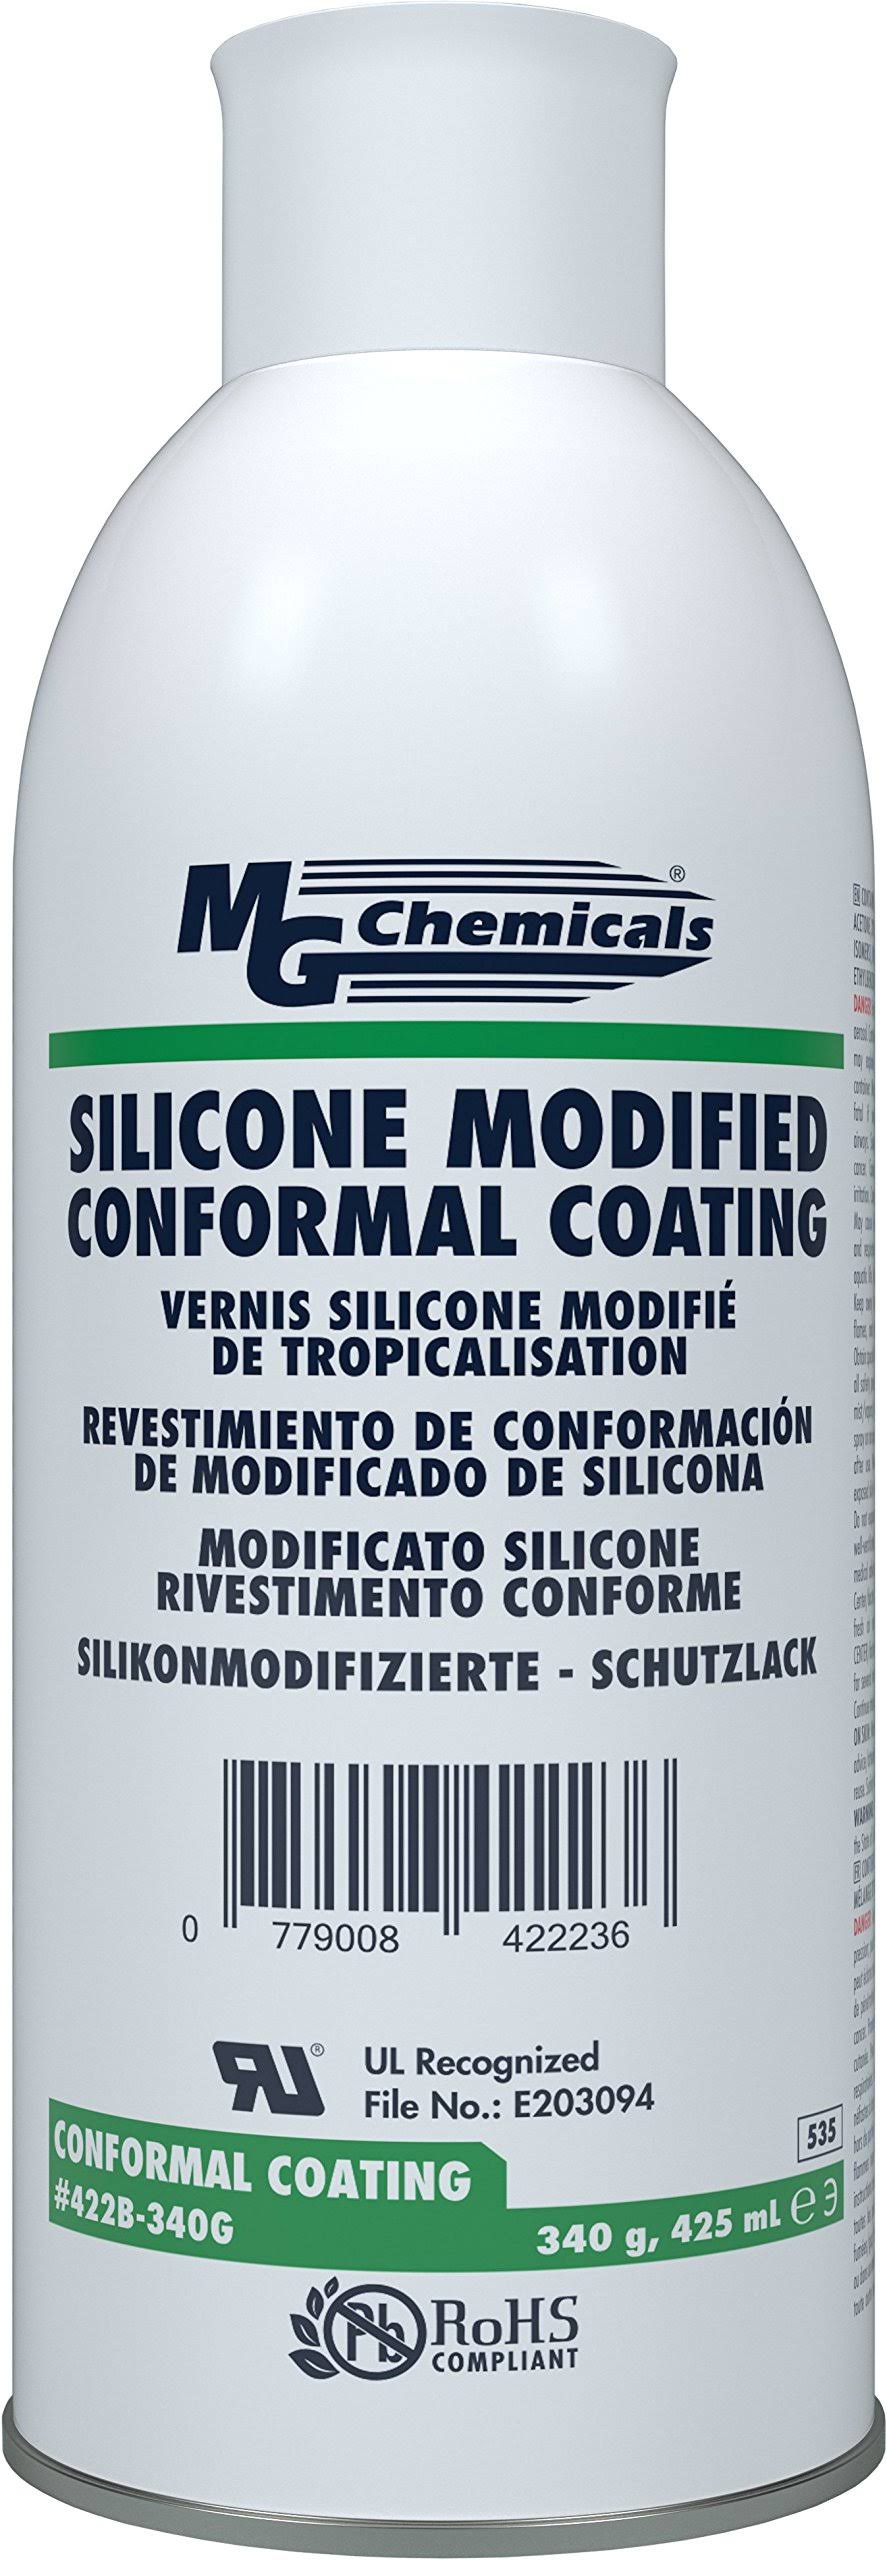 MG Chemicals 422B-340G - Silicone Conformal Coating